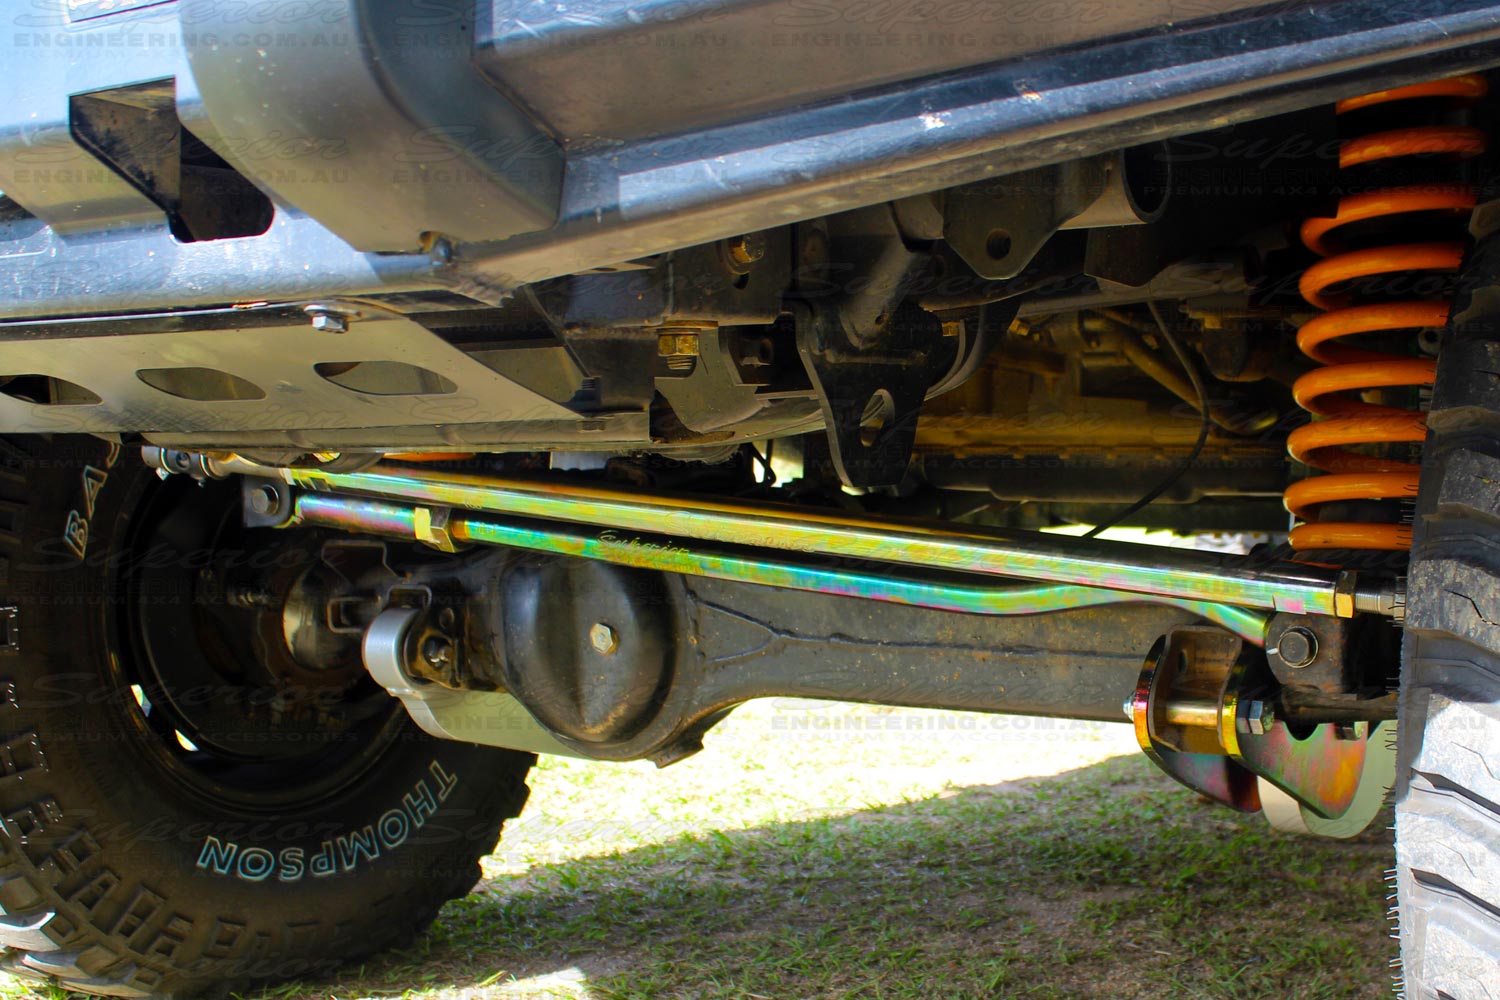 Heavy duty Superior drag link and panhard rod 4wd setup